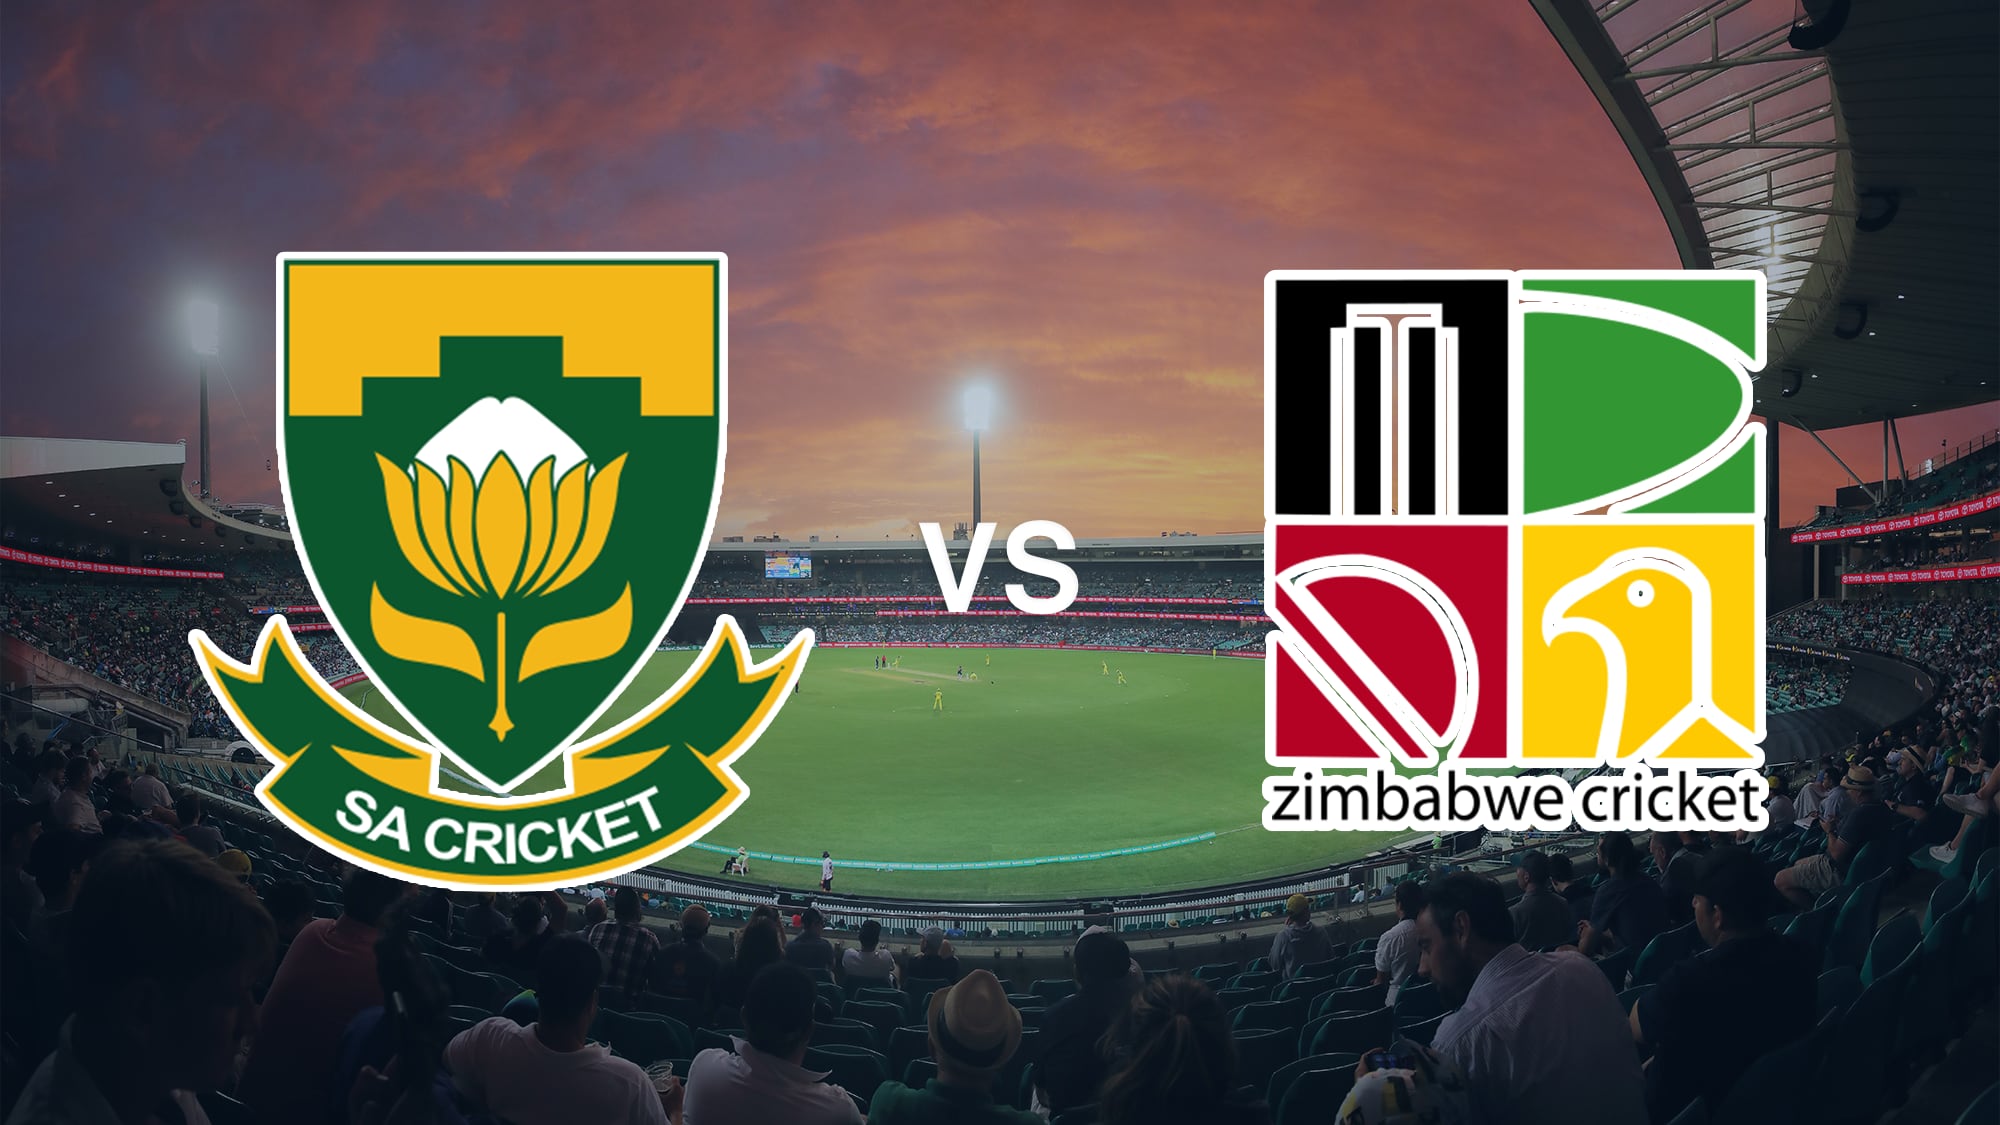 south africa t20 live